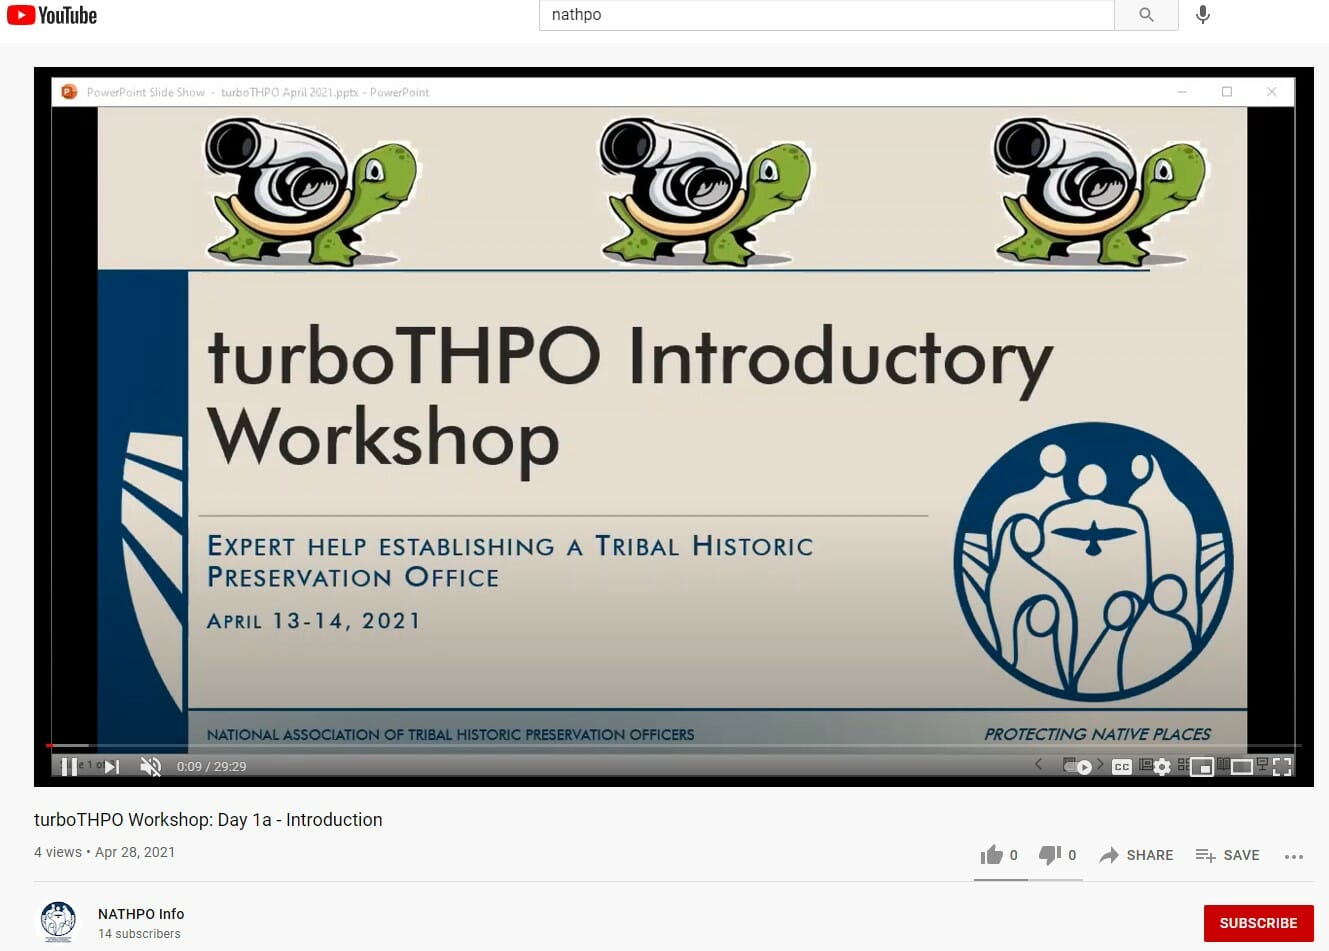 turboTHPO: Application Workshop Introduction